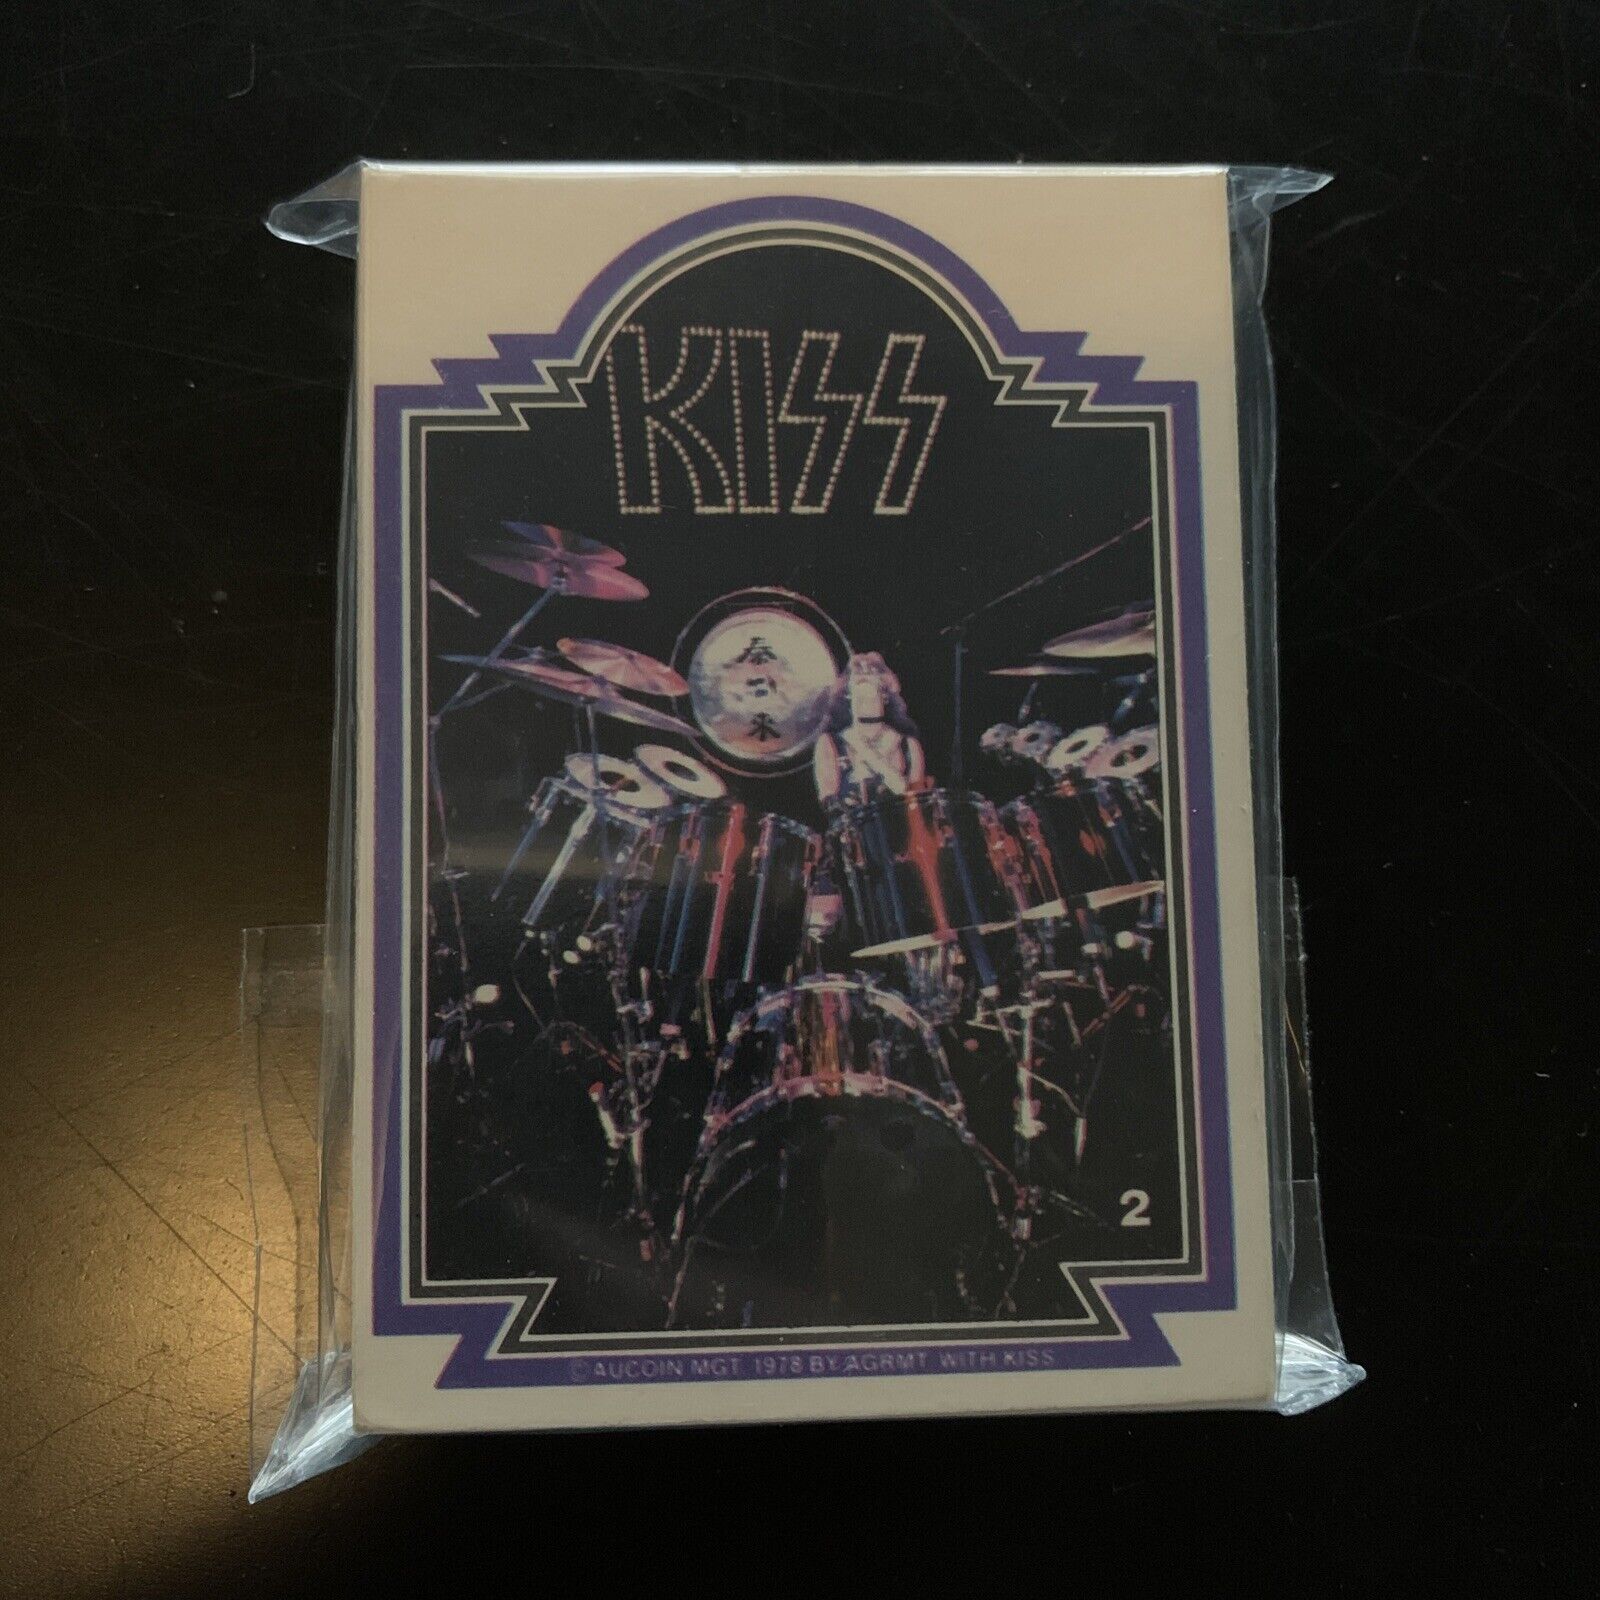 Vintage KISS 2 - 65 Trading Cards 40 Total Paul Stanley Ace Frehley Gene Simmons